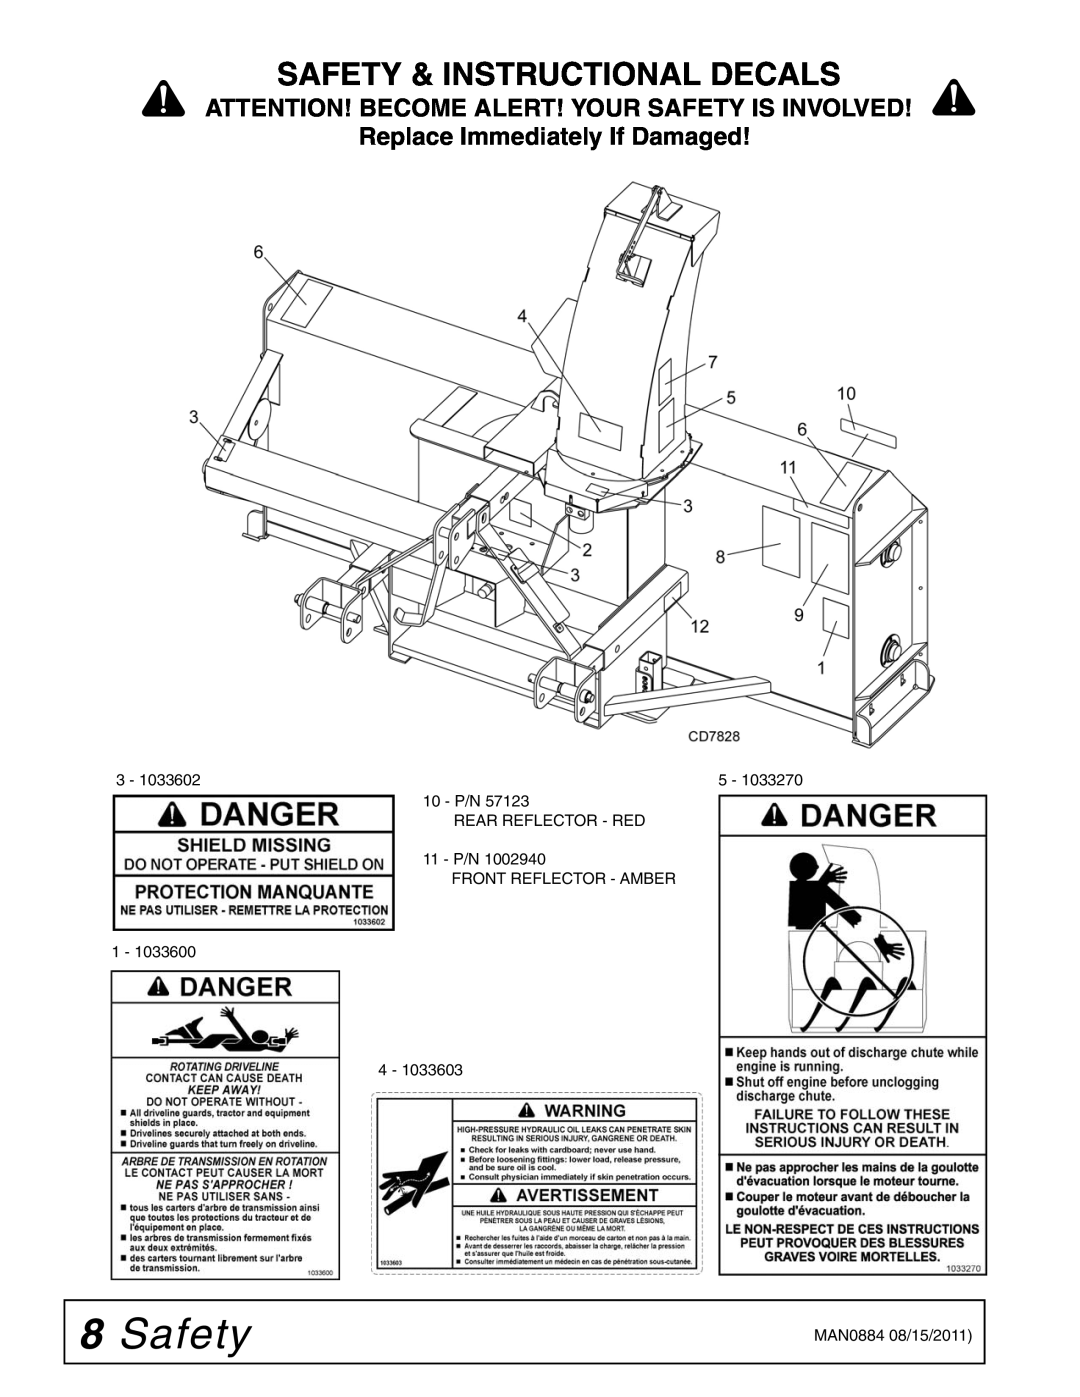 Woods Equipment SS108-2, SS84-2 manual Safety & Instructional Decals, Replace Immediately If Damaged, MAN0884 08/15/2011 